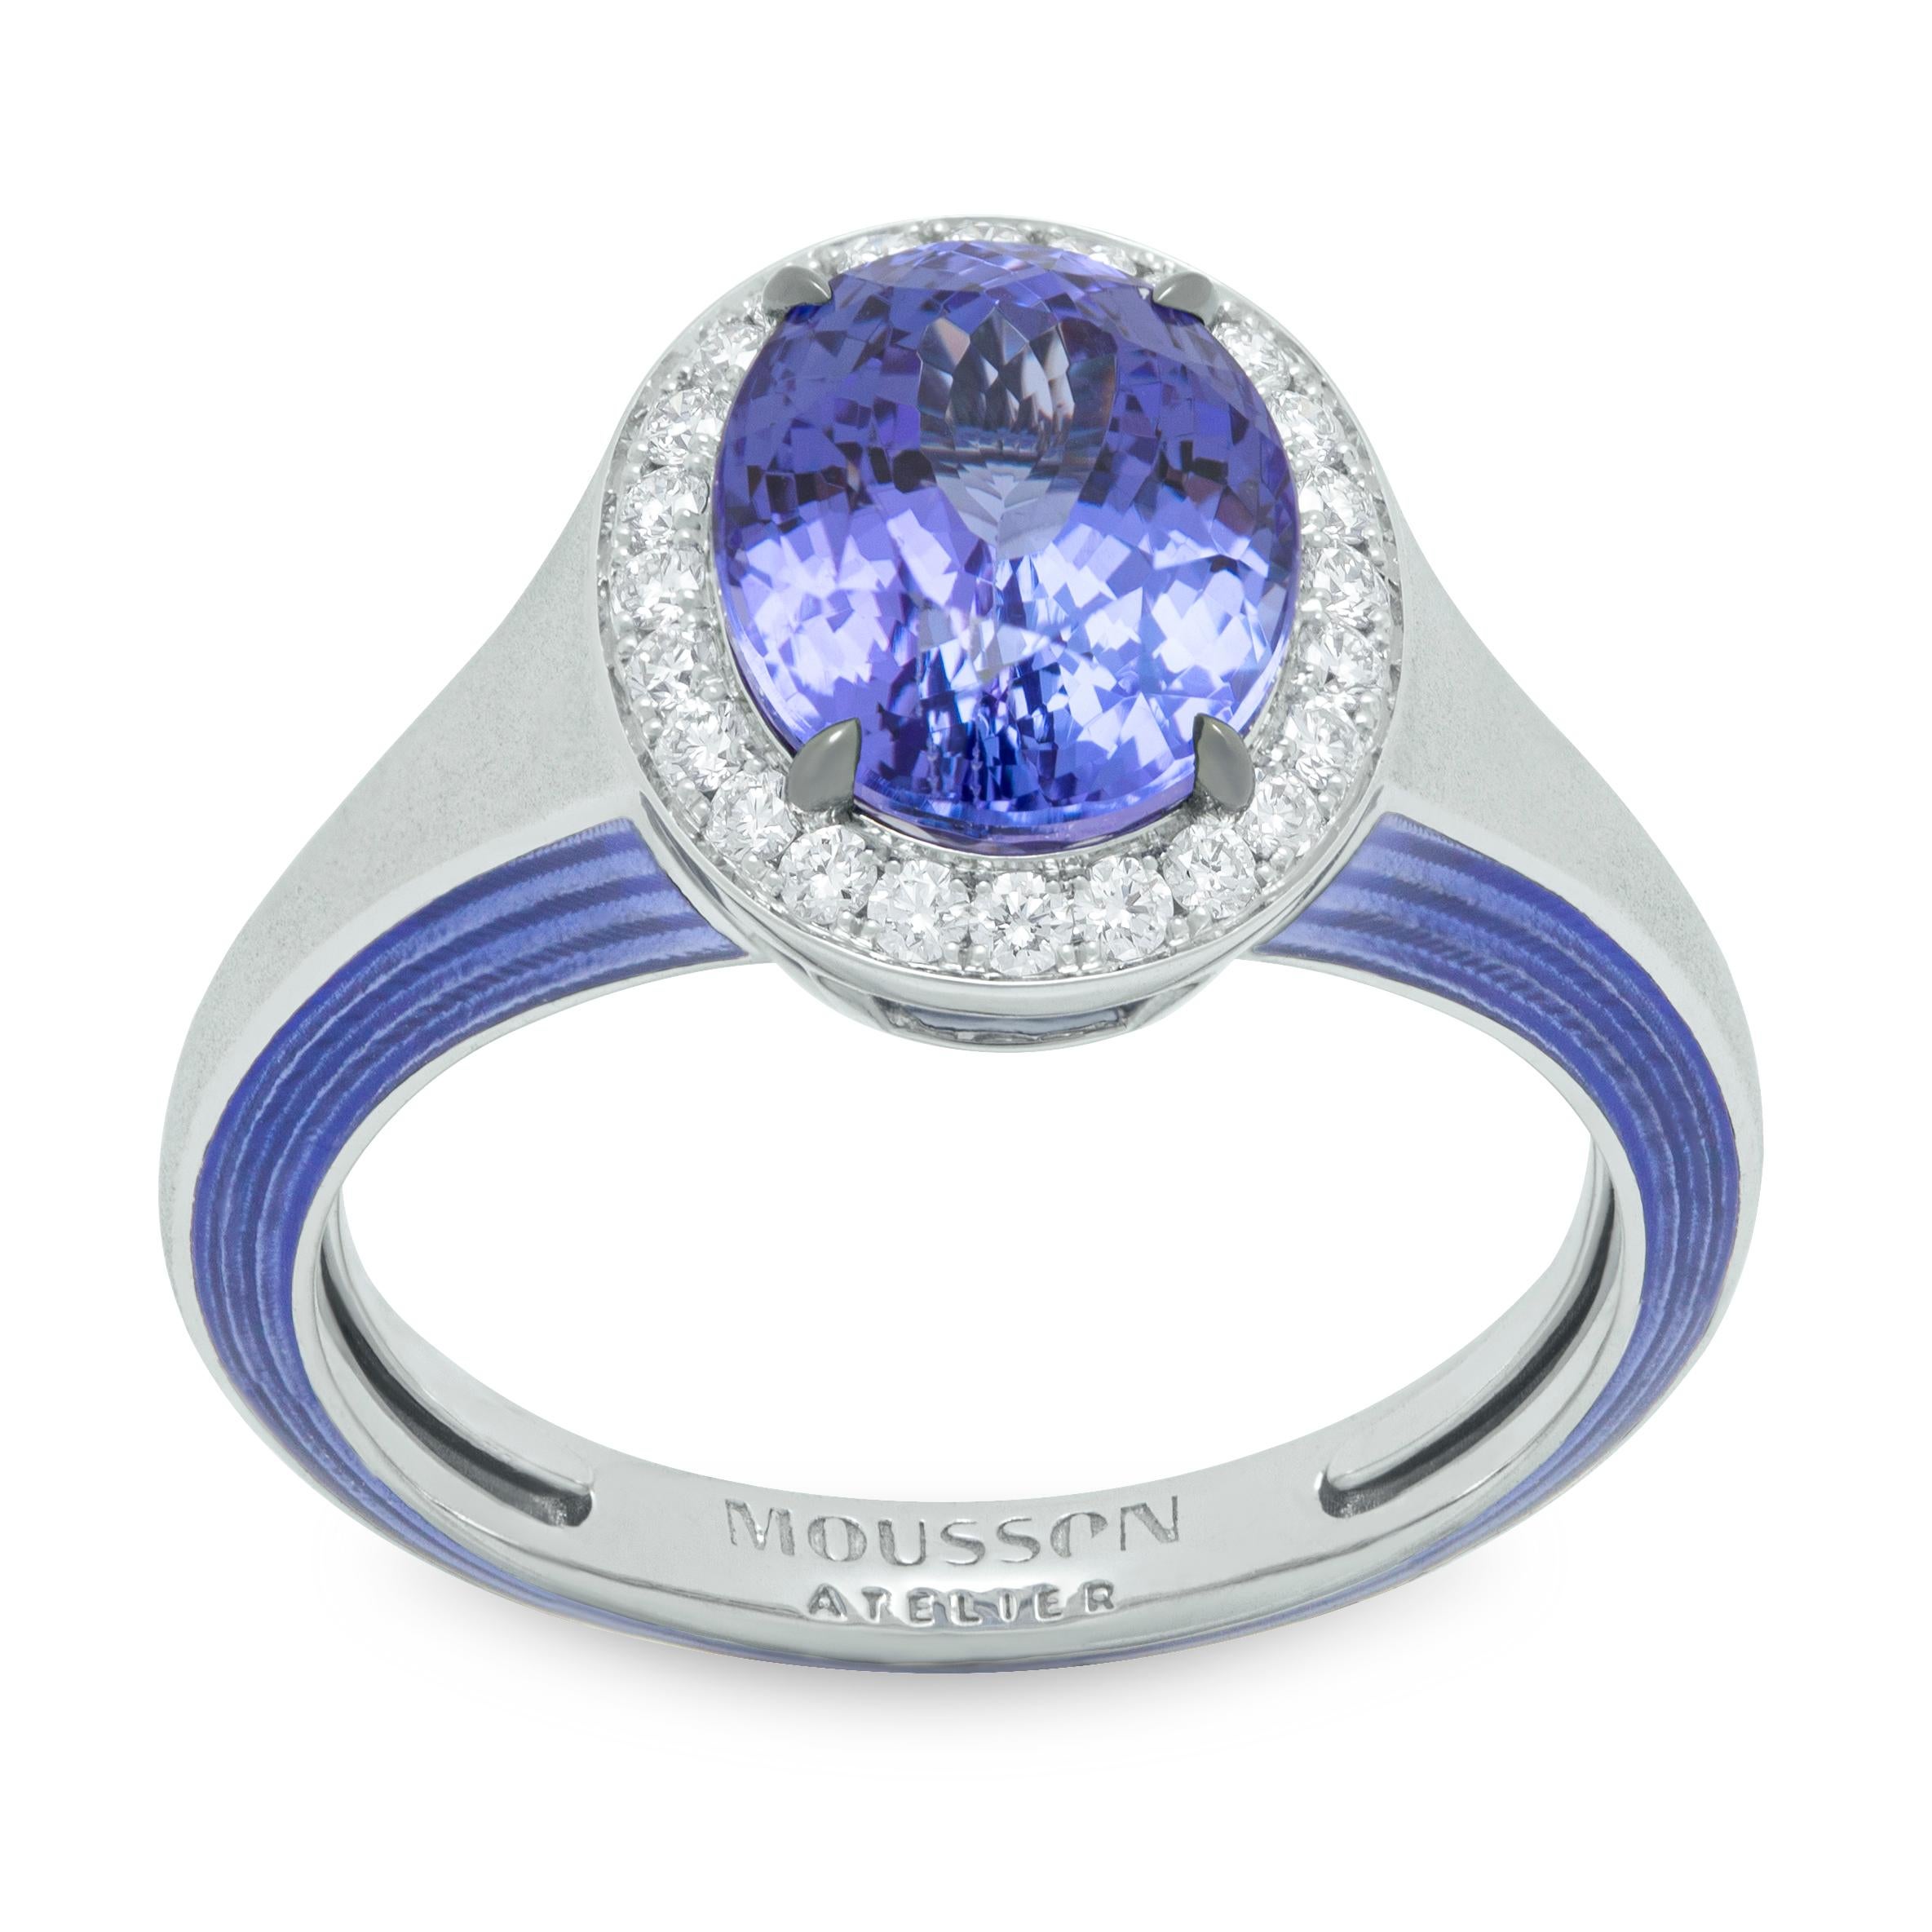 Tanzanite Diamonds 18 Karat White Gold Enamel New Classic Suite

Check out this regal Suite, lovingly crafted from 18K White Gold, studded with Tanzanites, and Diamonds, and topped with some funky Enamel - a look so luxe, royals will be